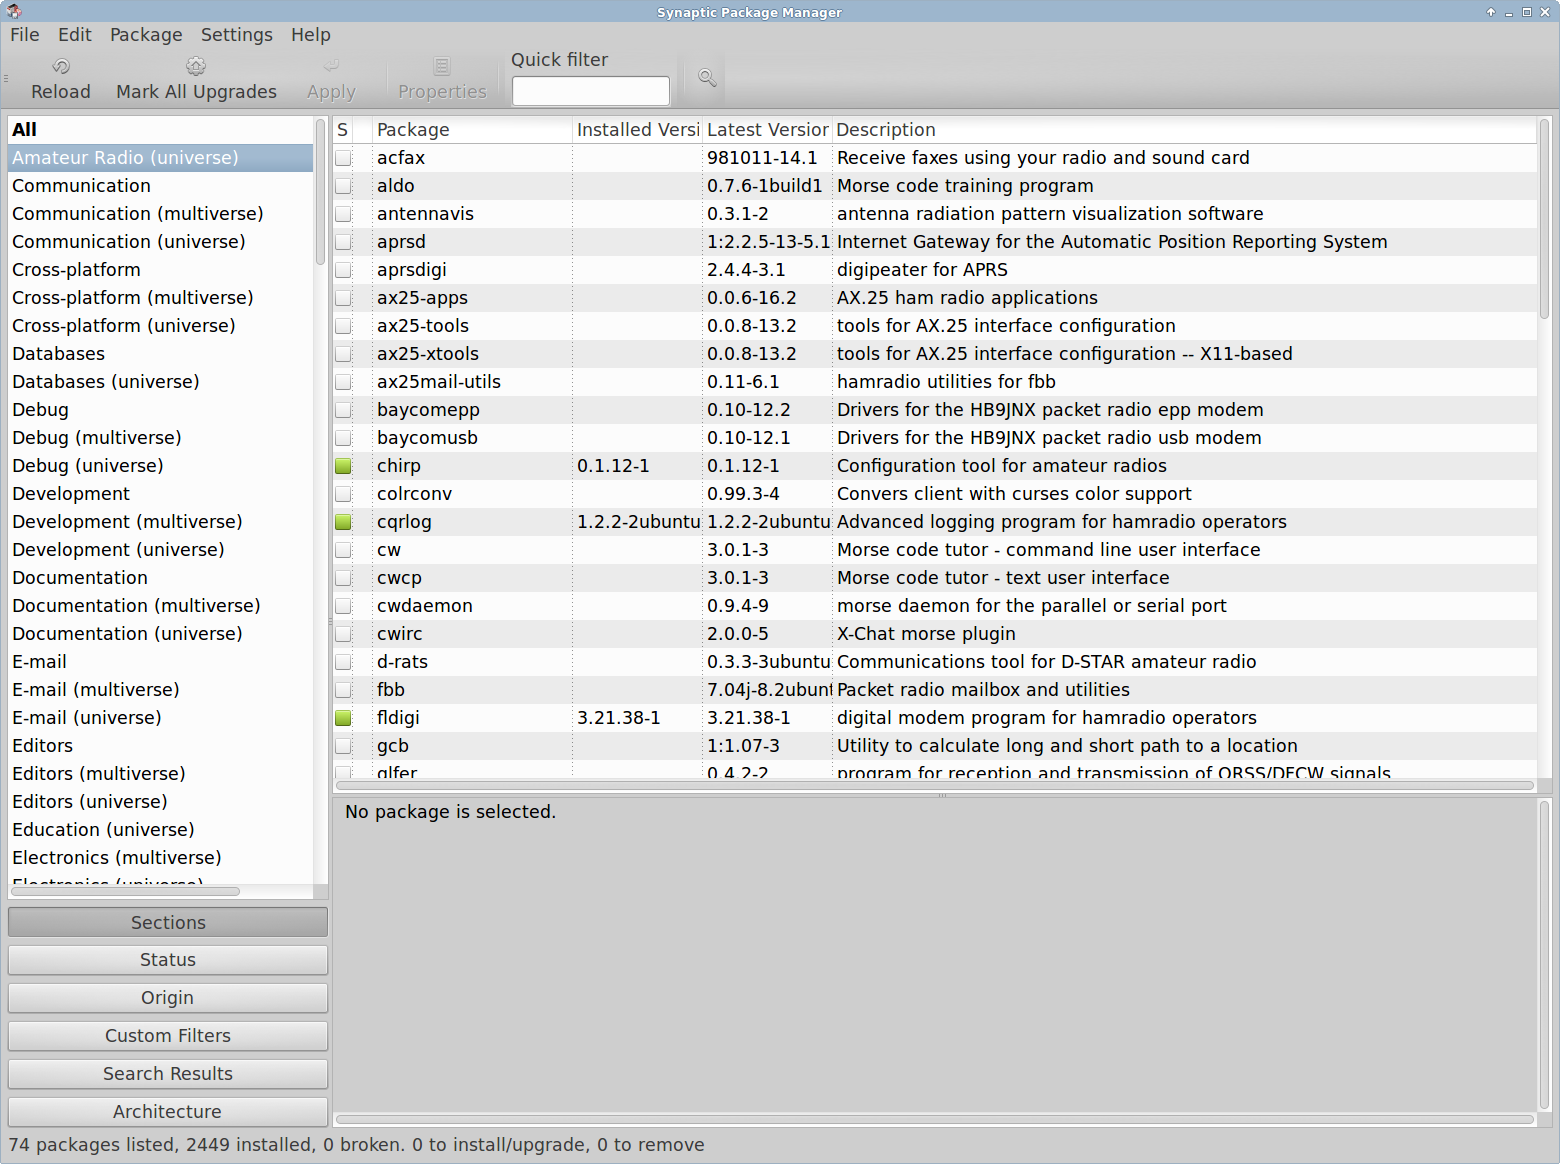 The Synaptic graphical package manager partially showing the “Amateur Radio” section of the Xubuntu LTS repository.